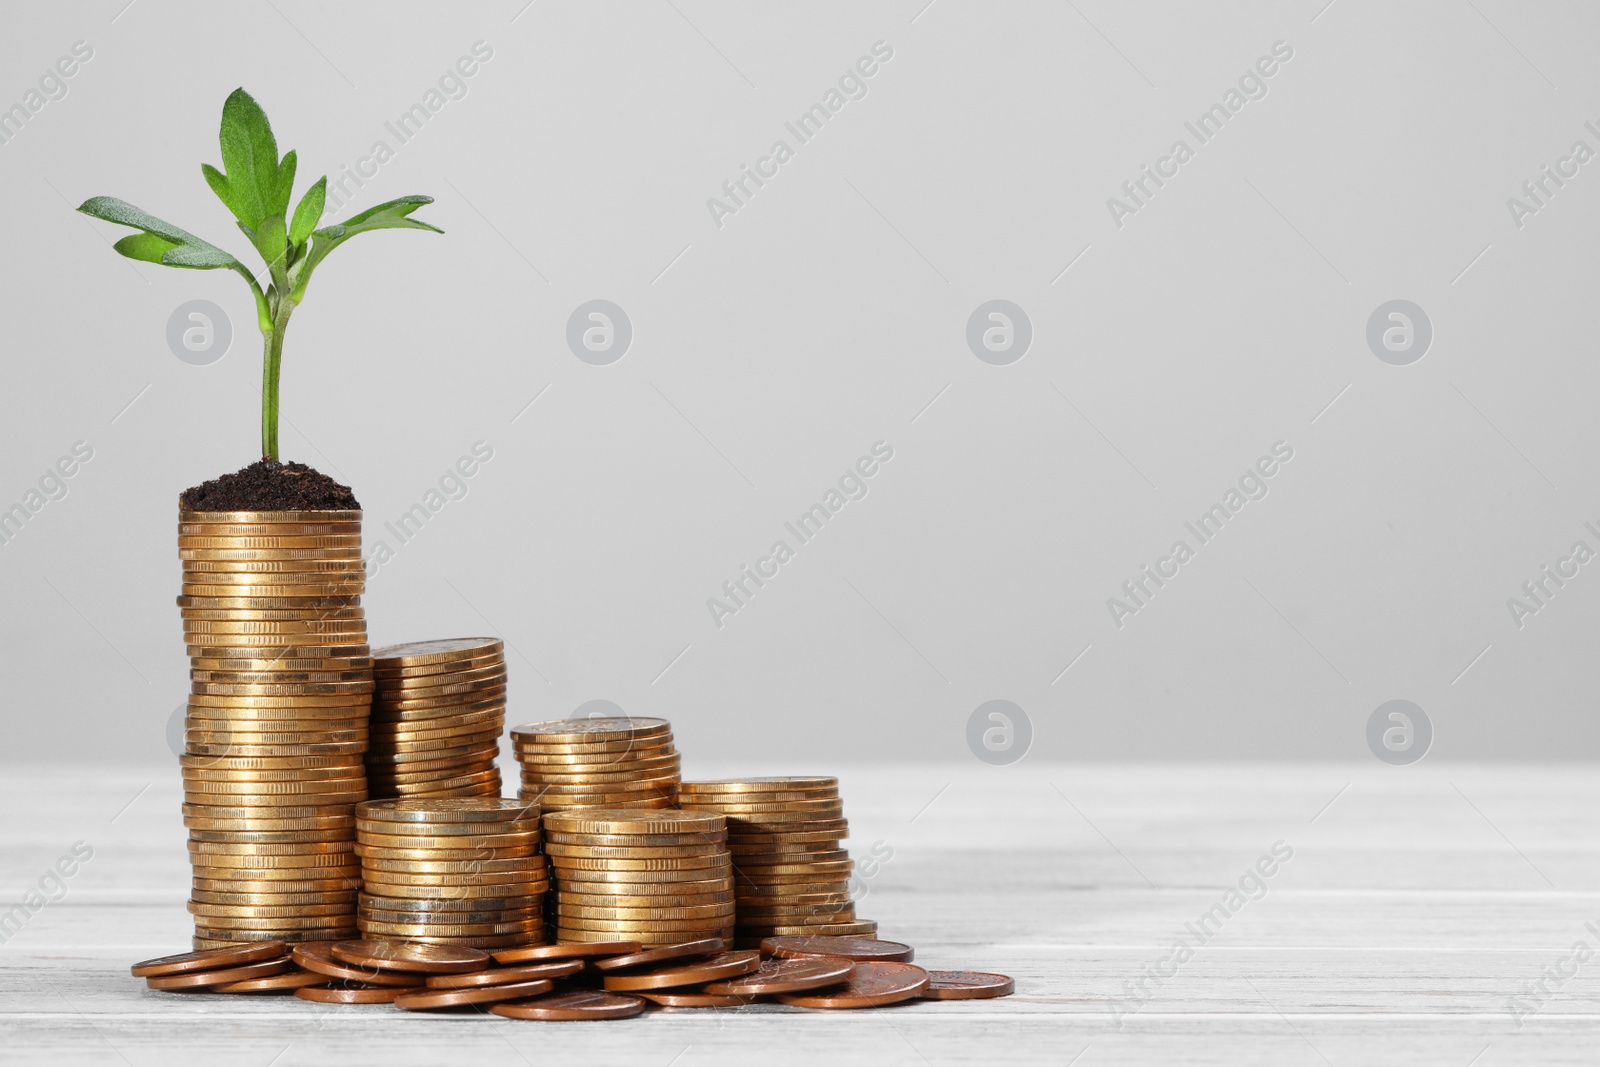 Photo of Stacks of coins and green sprout on white wooden table against light grey background, space for text. Investment concept